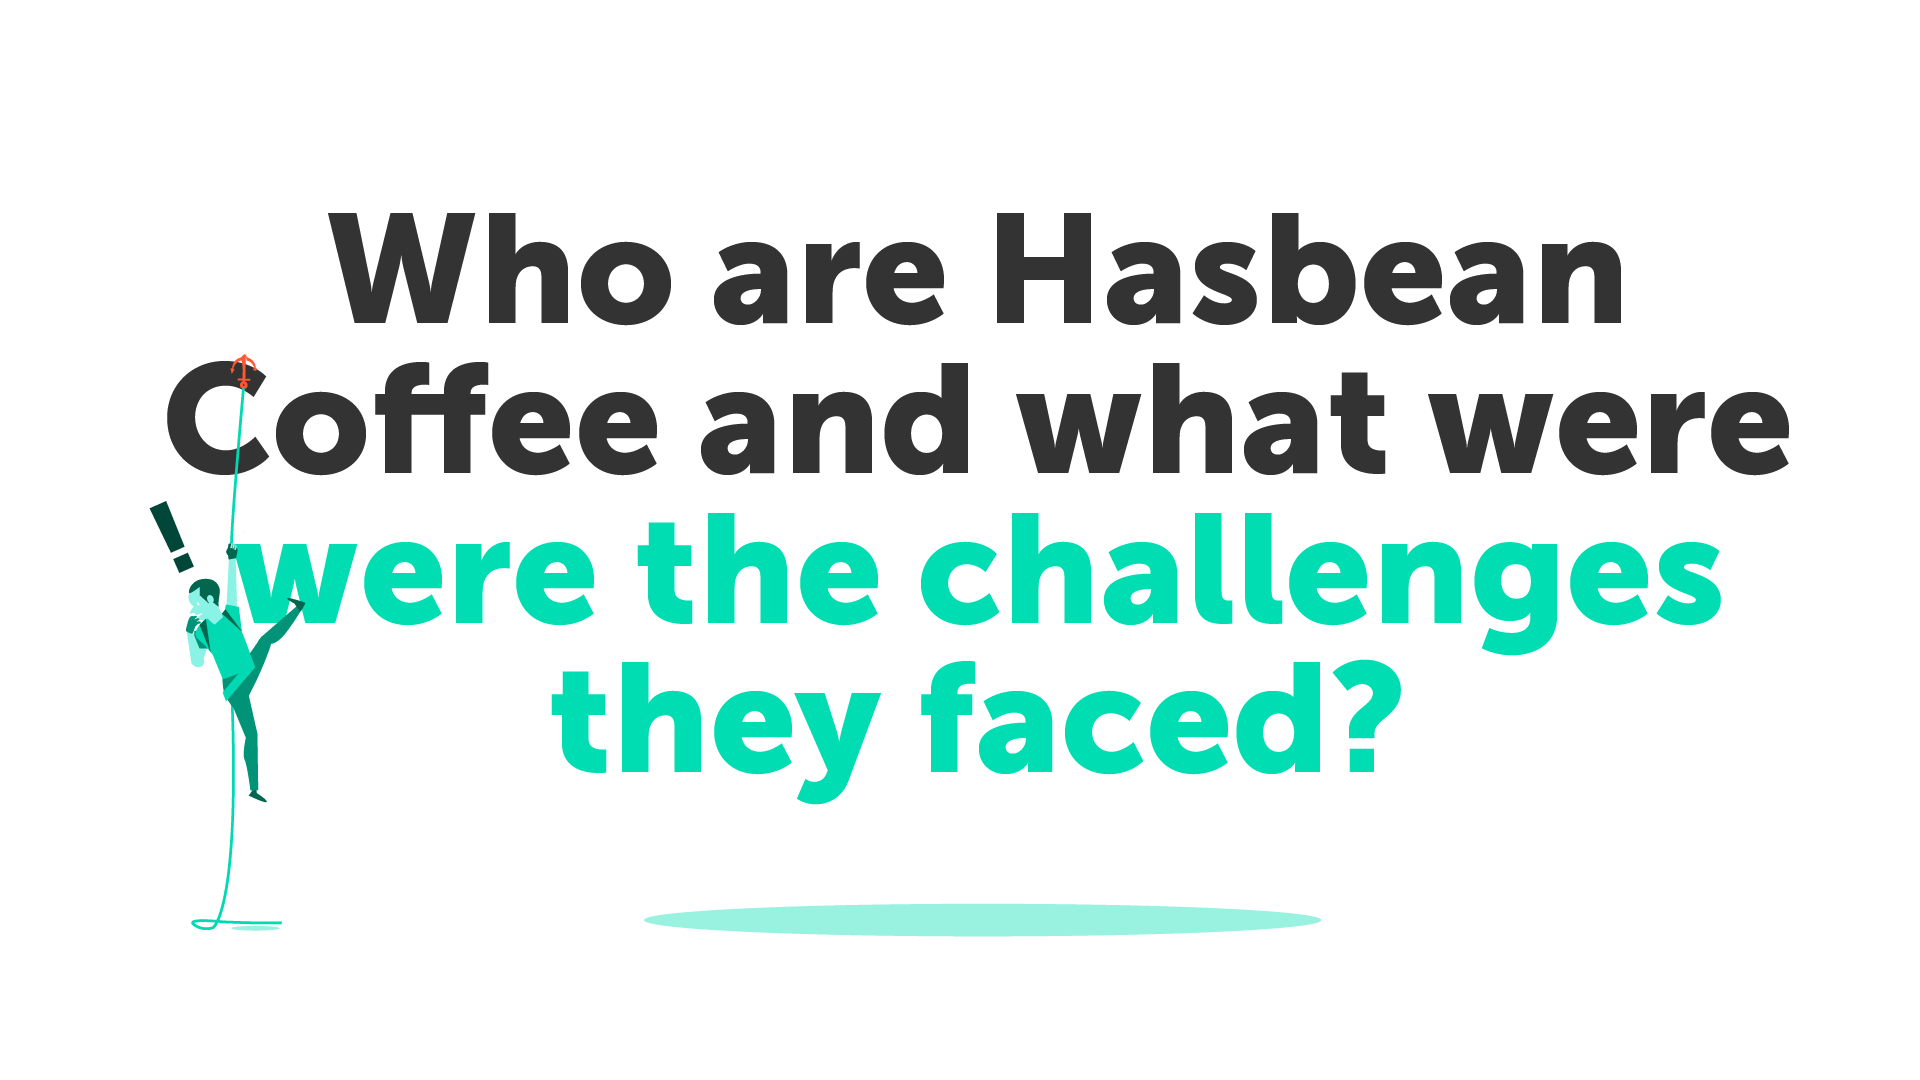 Who are Hasbean Coffee and what were were the challenges they faced?